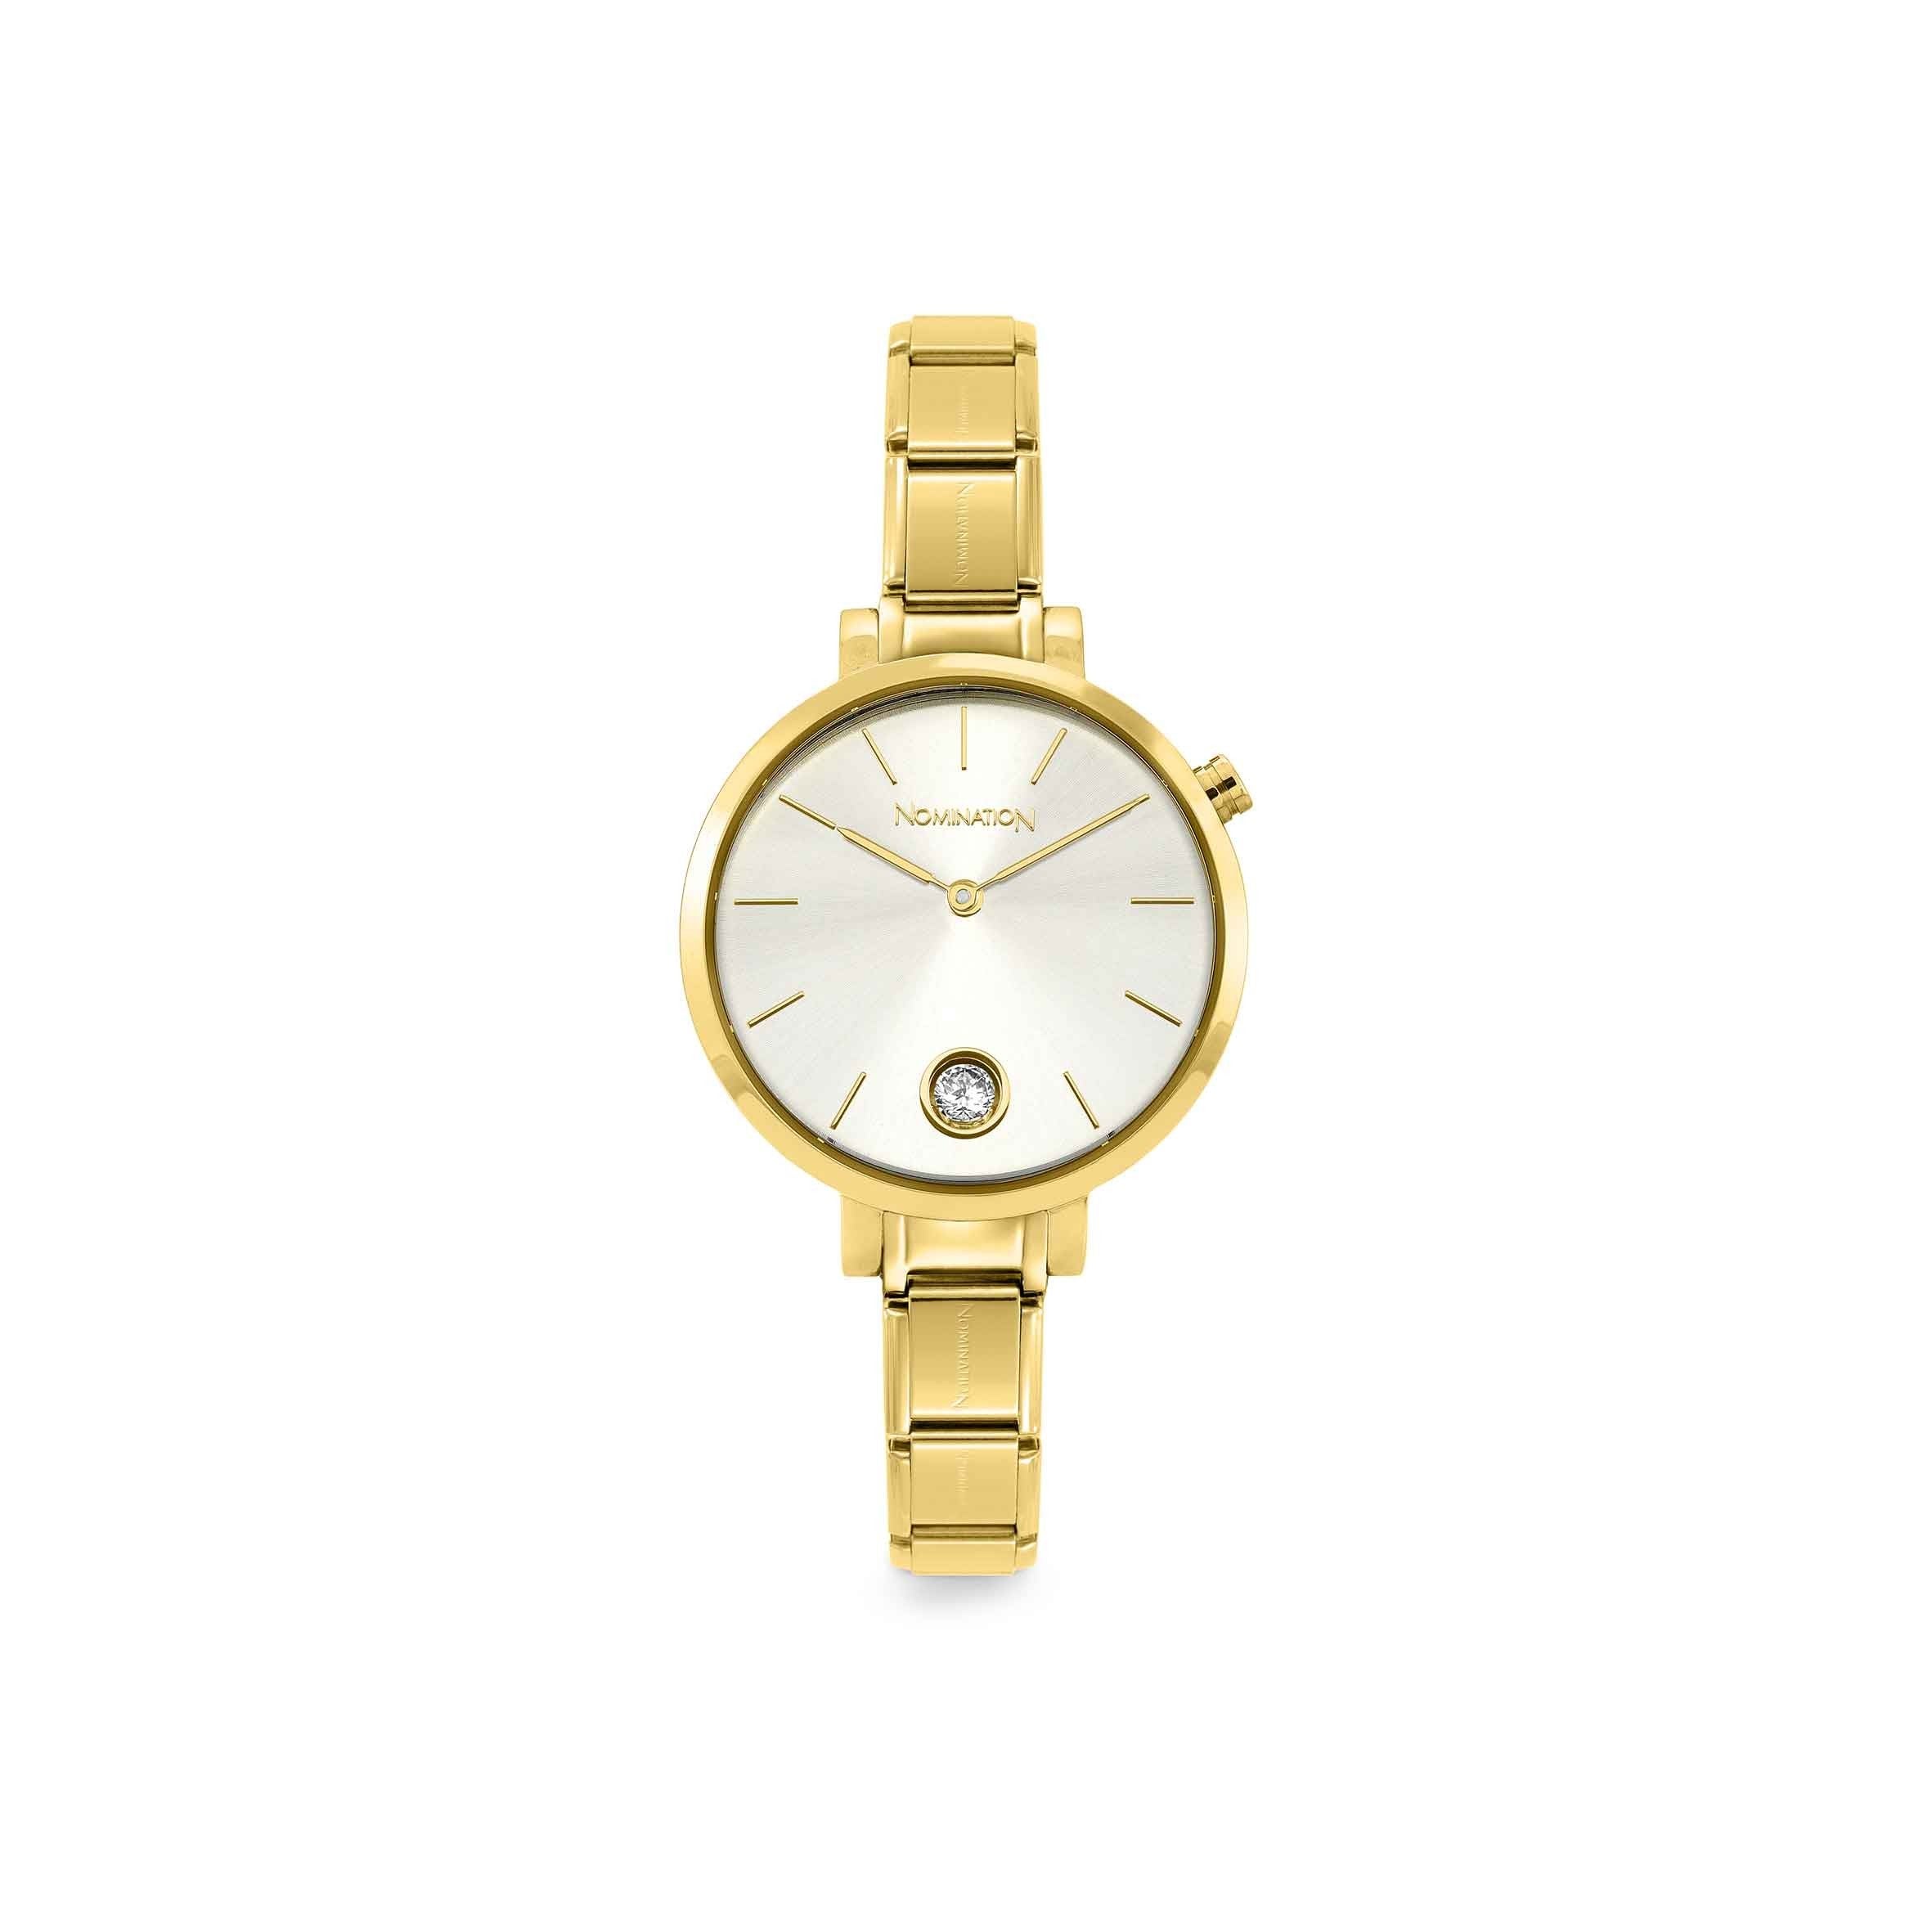 Nomination Paris Gold PVD with Mother of Pearl